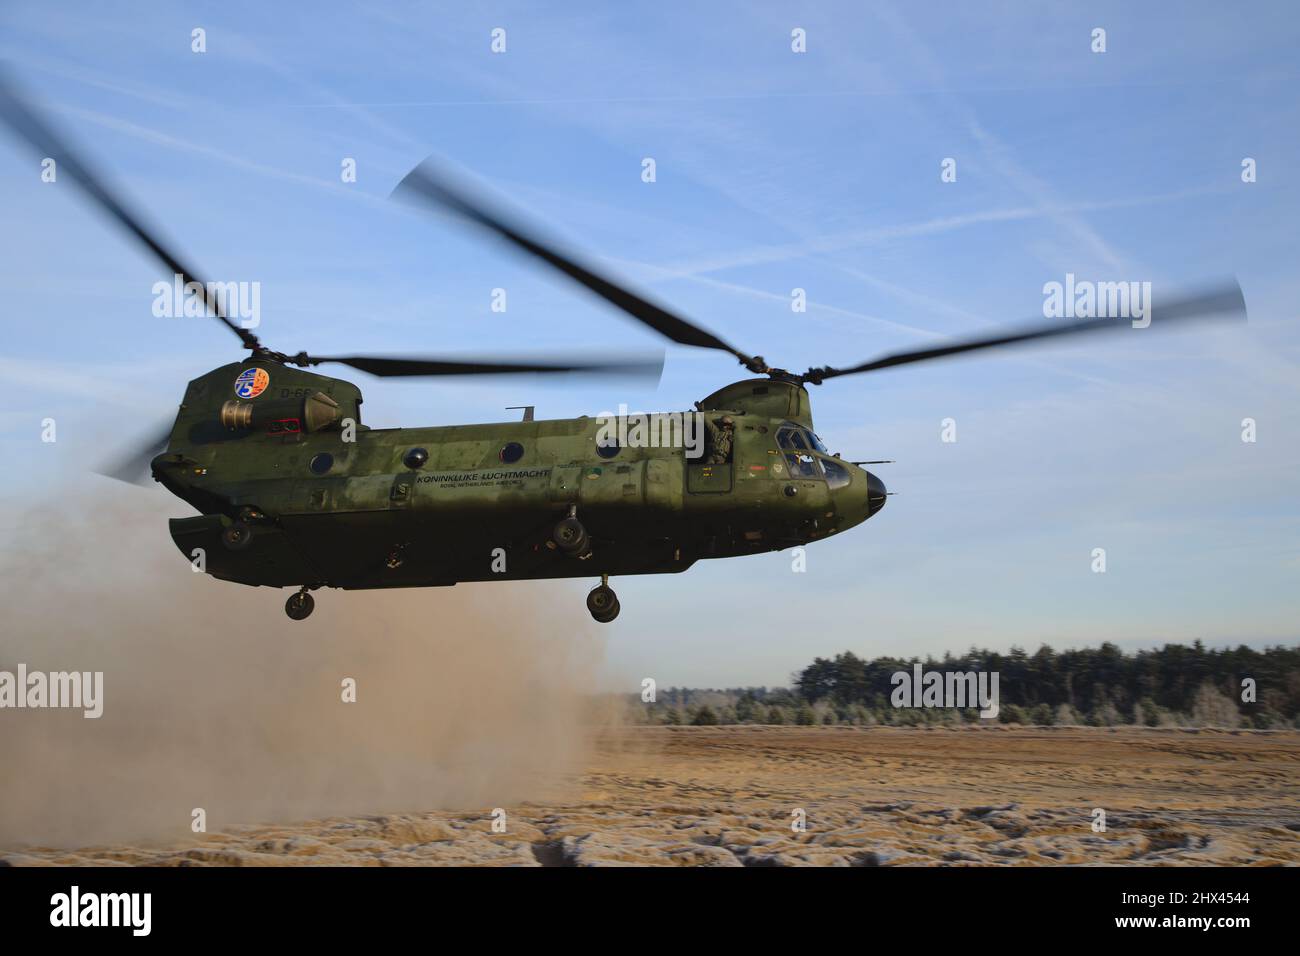 Low flying Chinook helicopter flying in a sandy environment, Dutch Air Force CH-47 Chinook Stock Photo